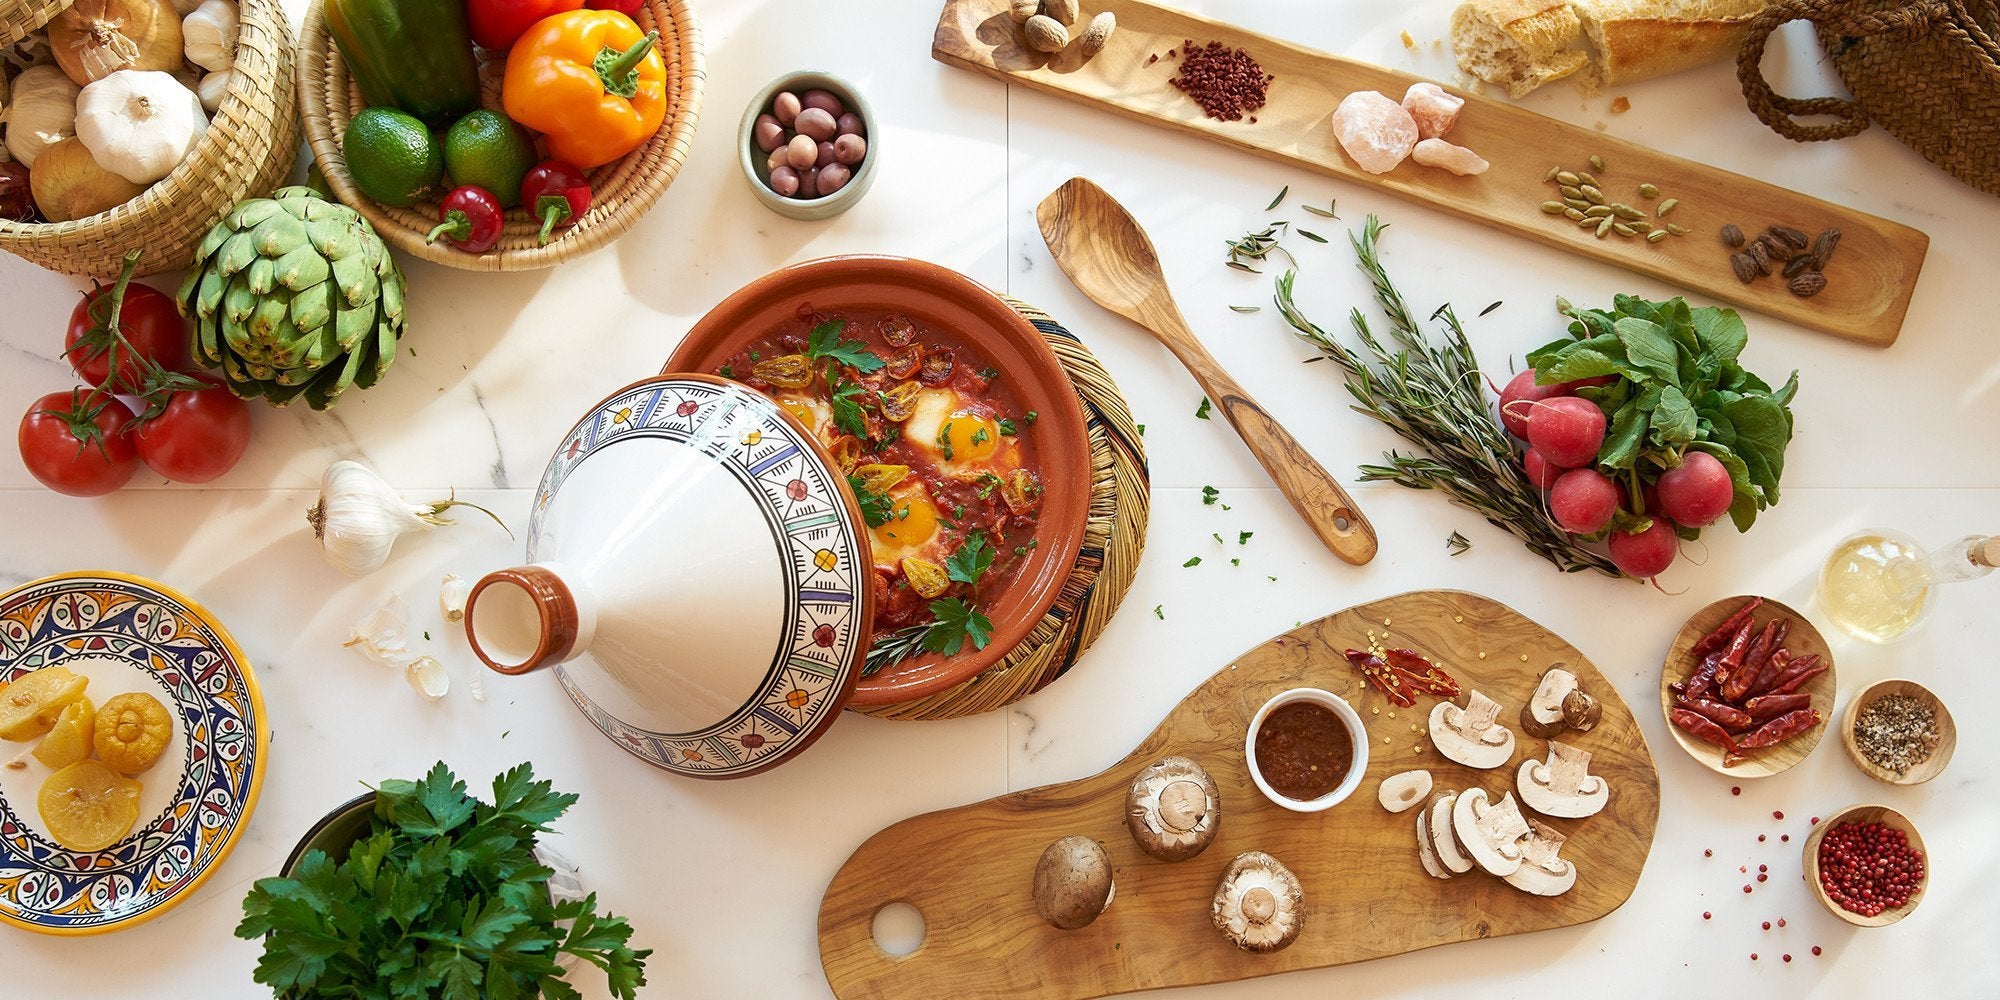 Cooking Tagines with various cutlery, spices, and food - on a white table.